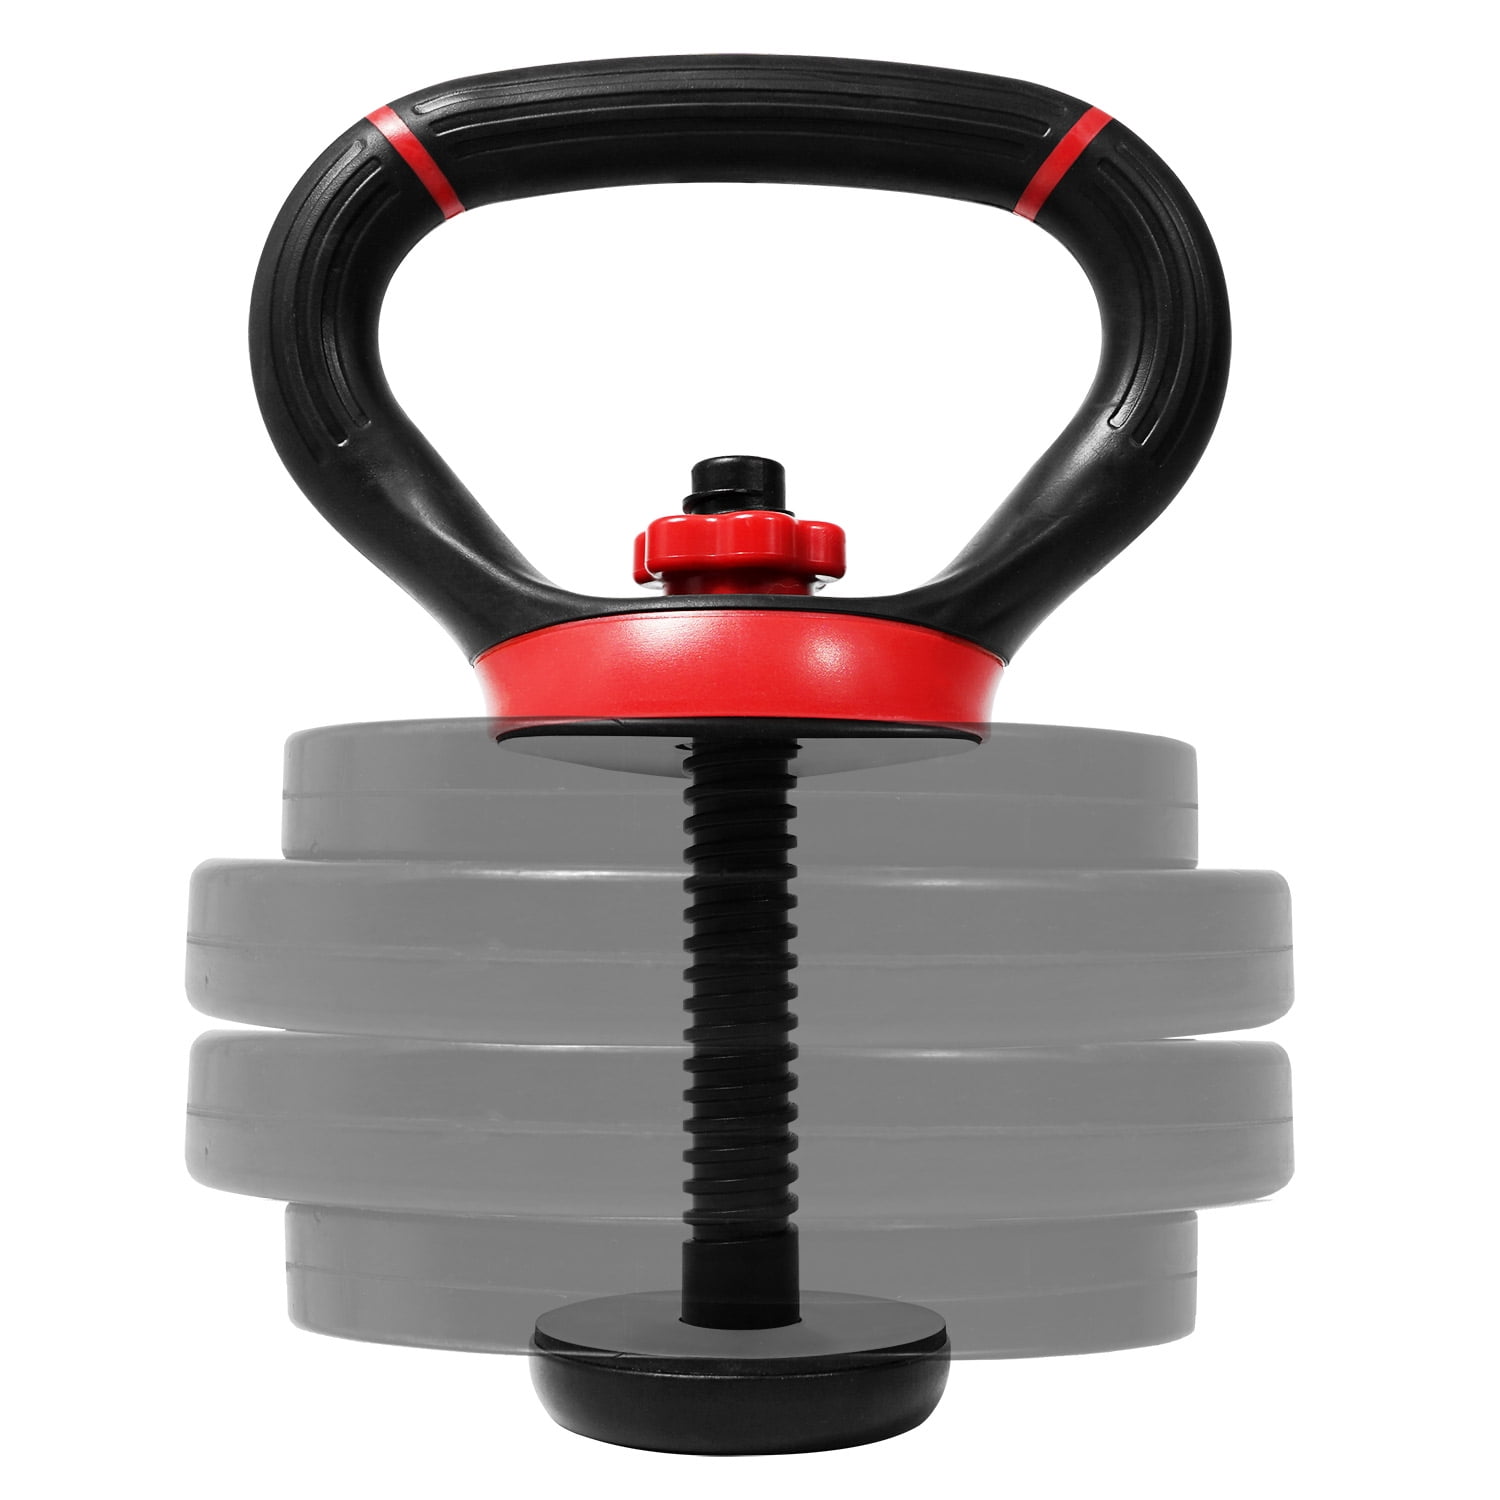 Adjustable Kettlebell Handle For Use With Weight Plates Home Gym Workout